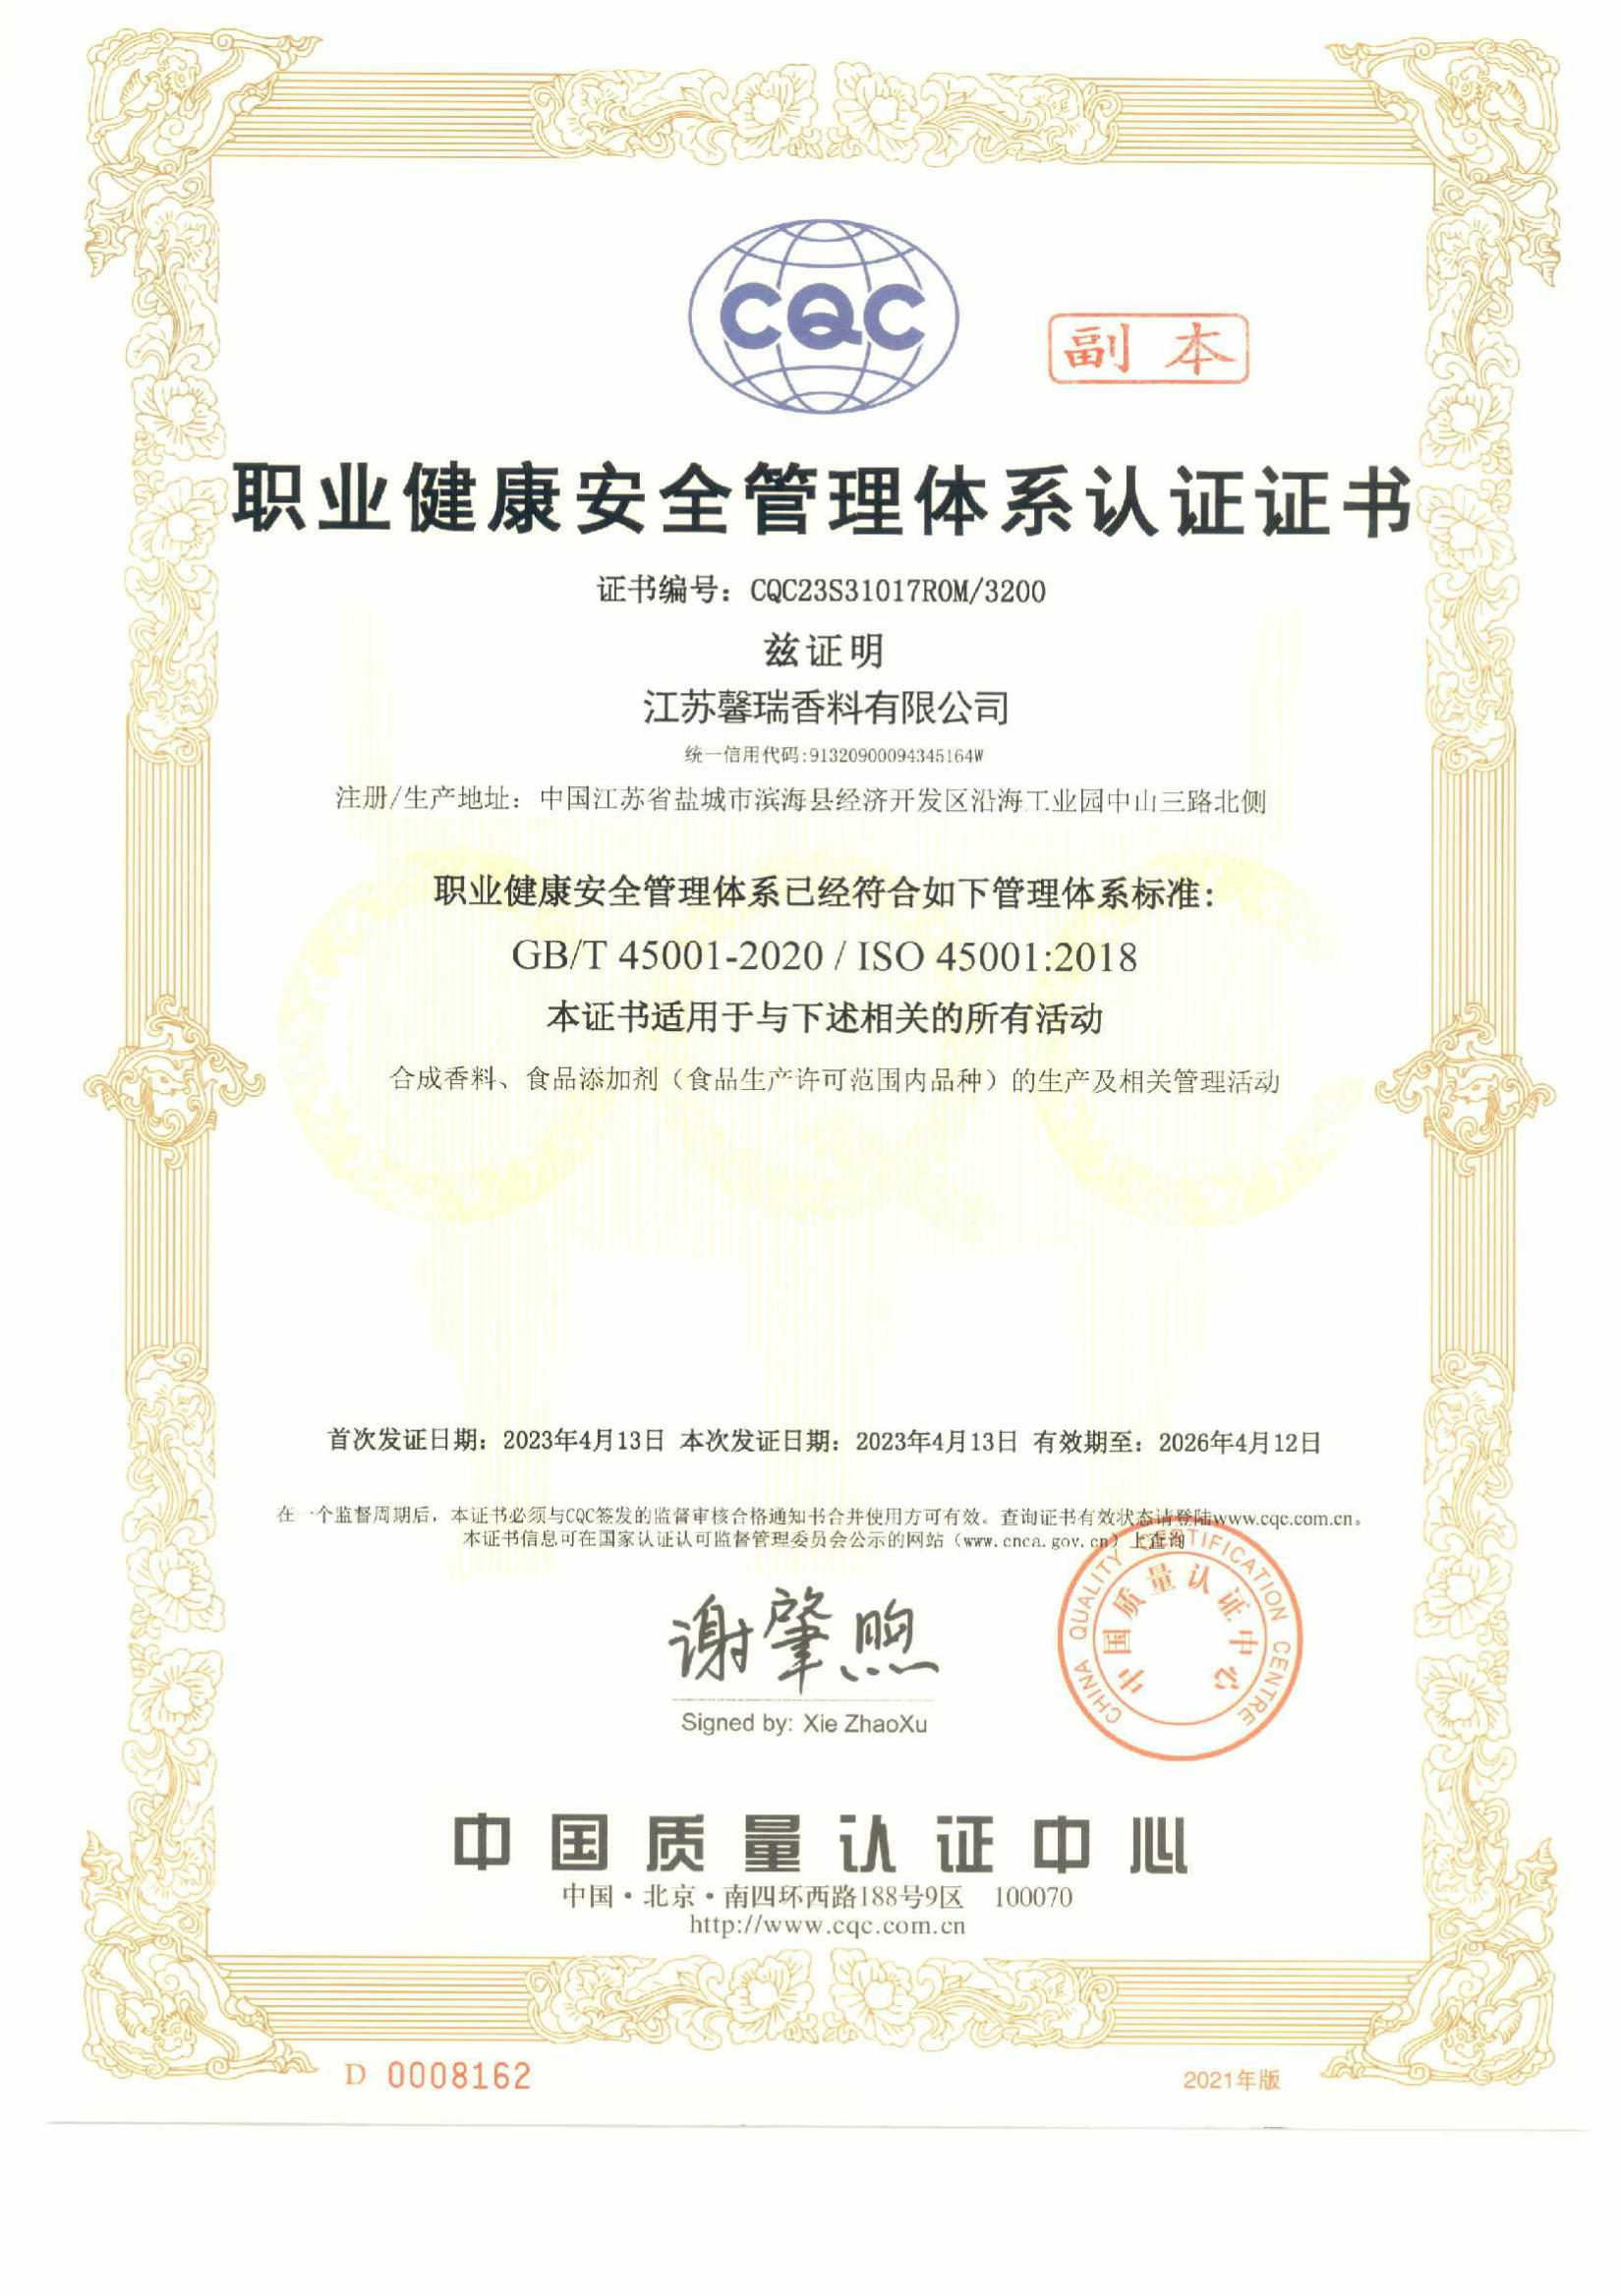 Health and Safety Certificate